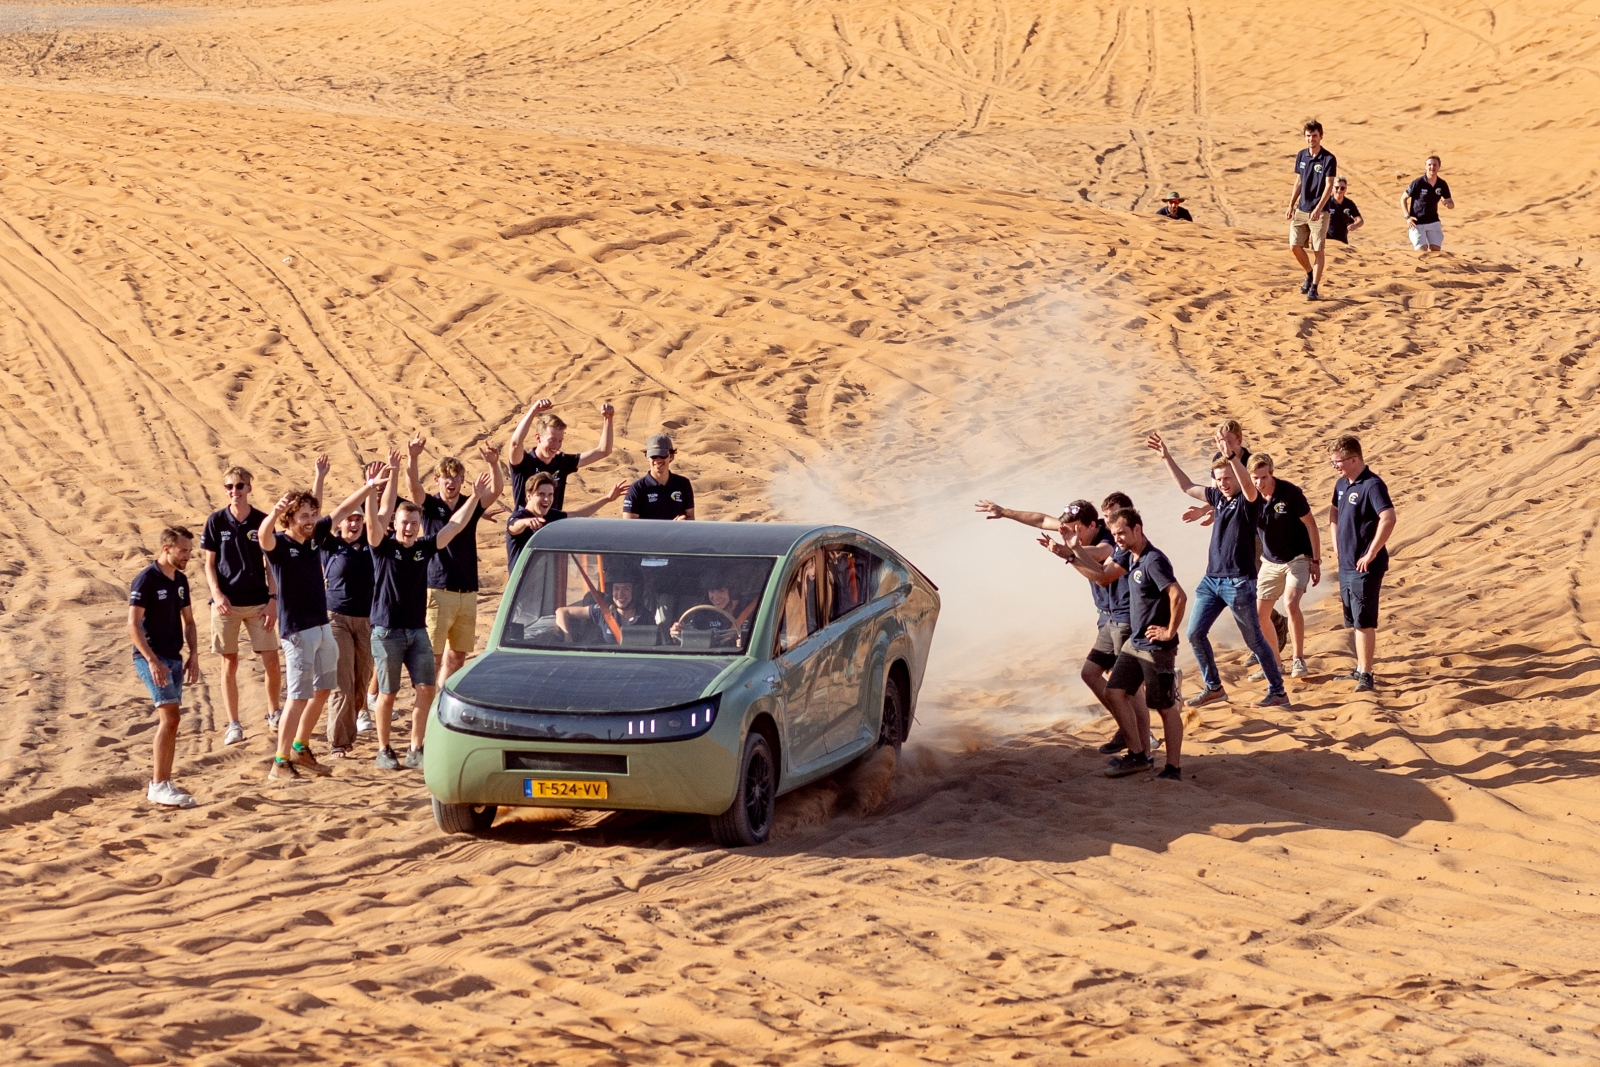 students welcome arrival of solar car at the Sahara desert